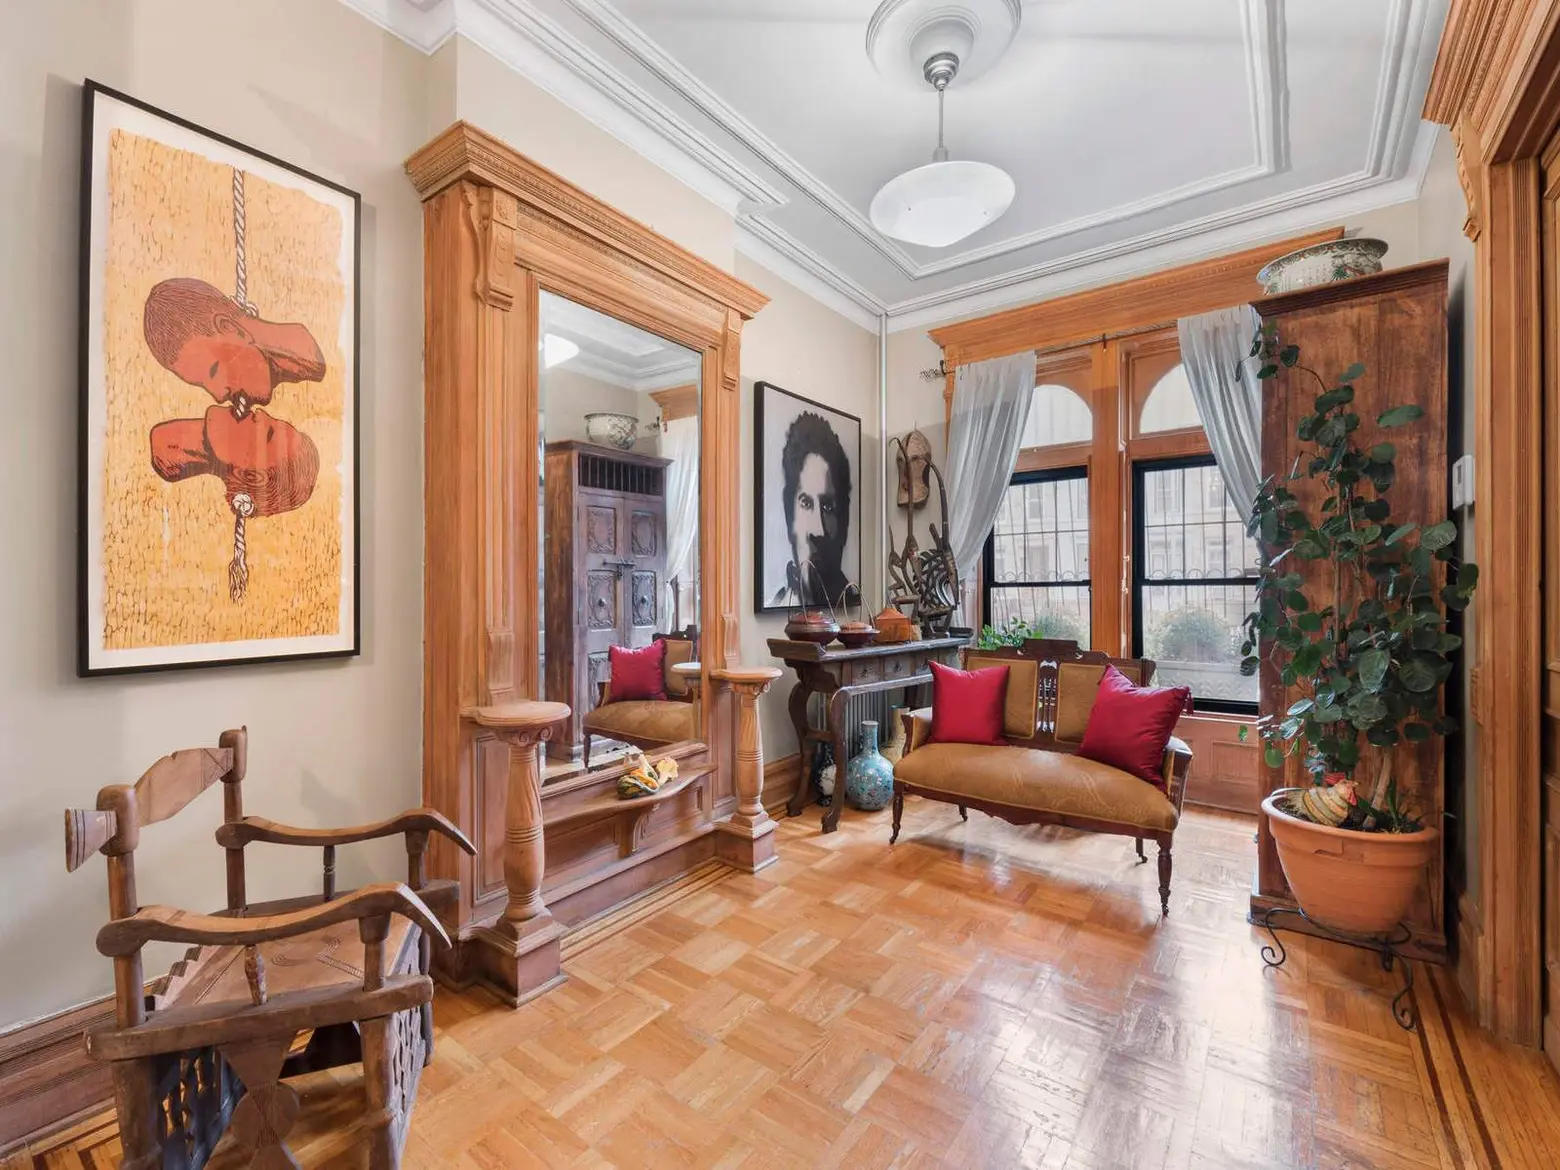 For $2.3M, an Amzi Hill-designed Bed-stuy townhouse with historic details and an artist’s legacy